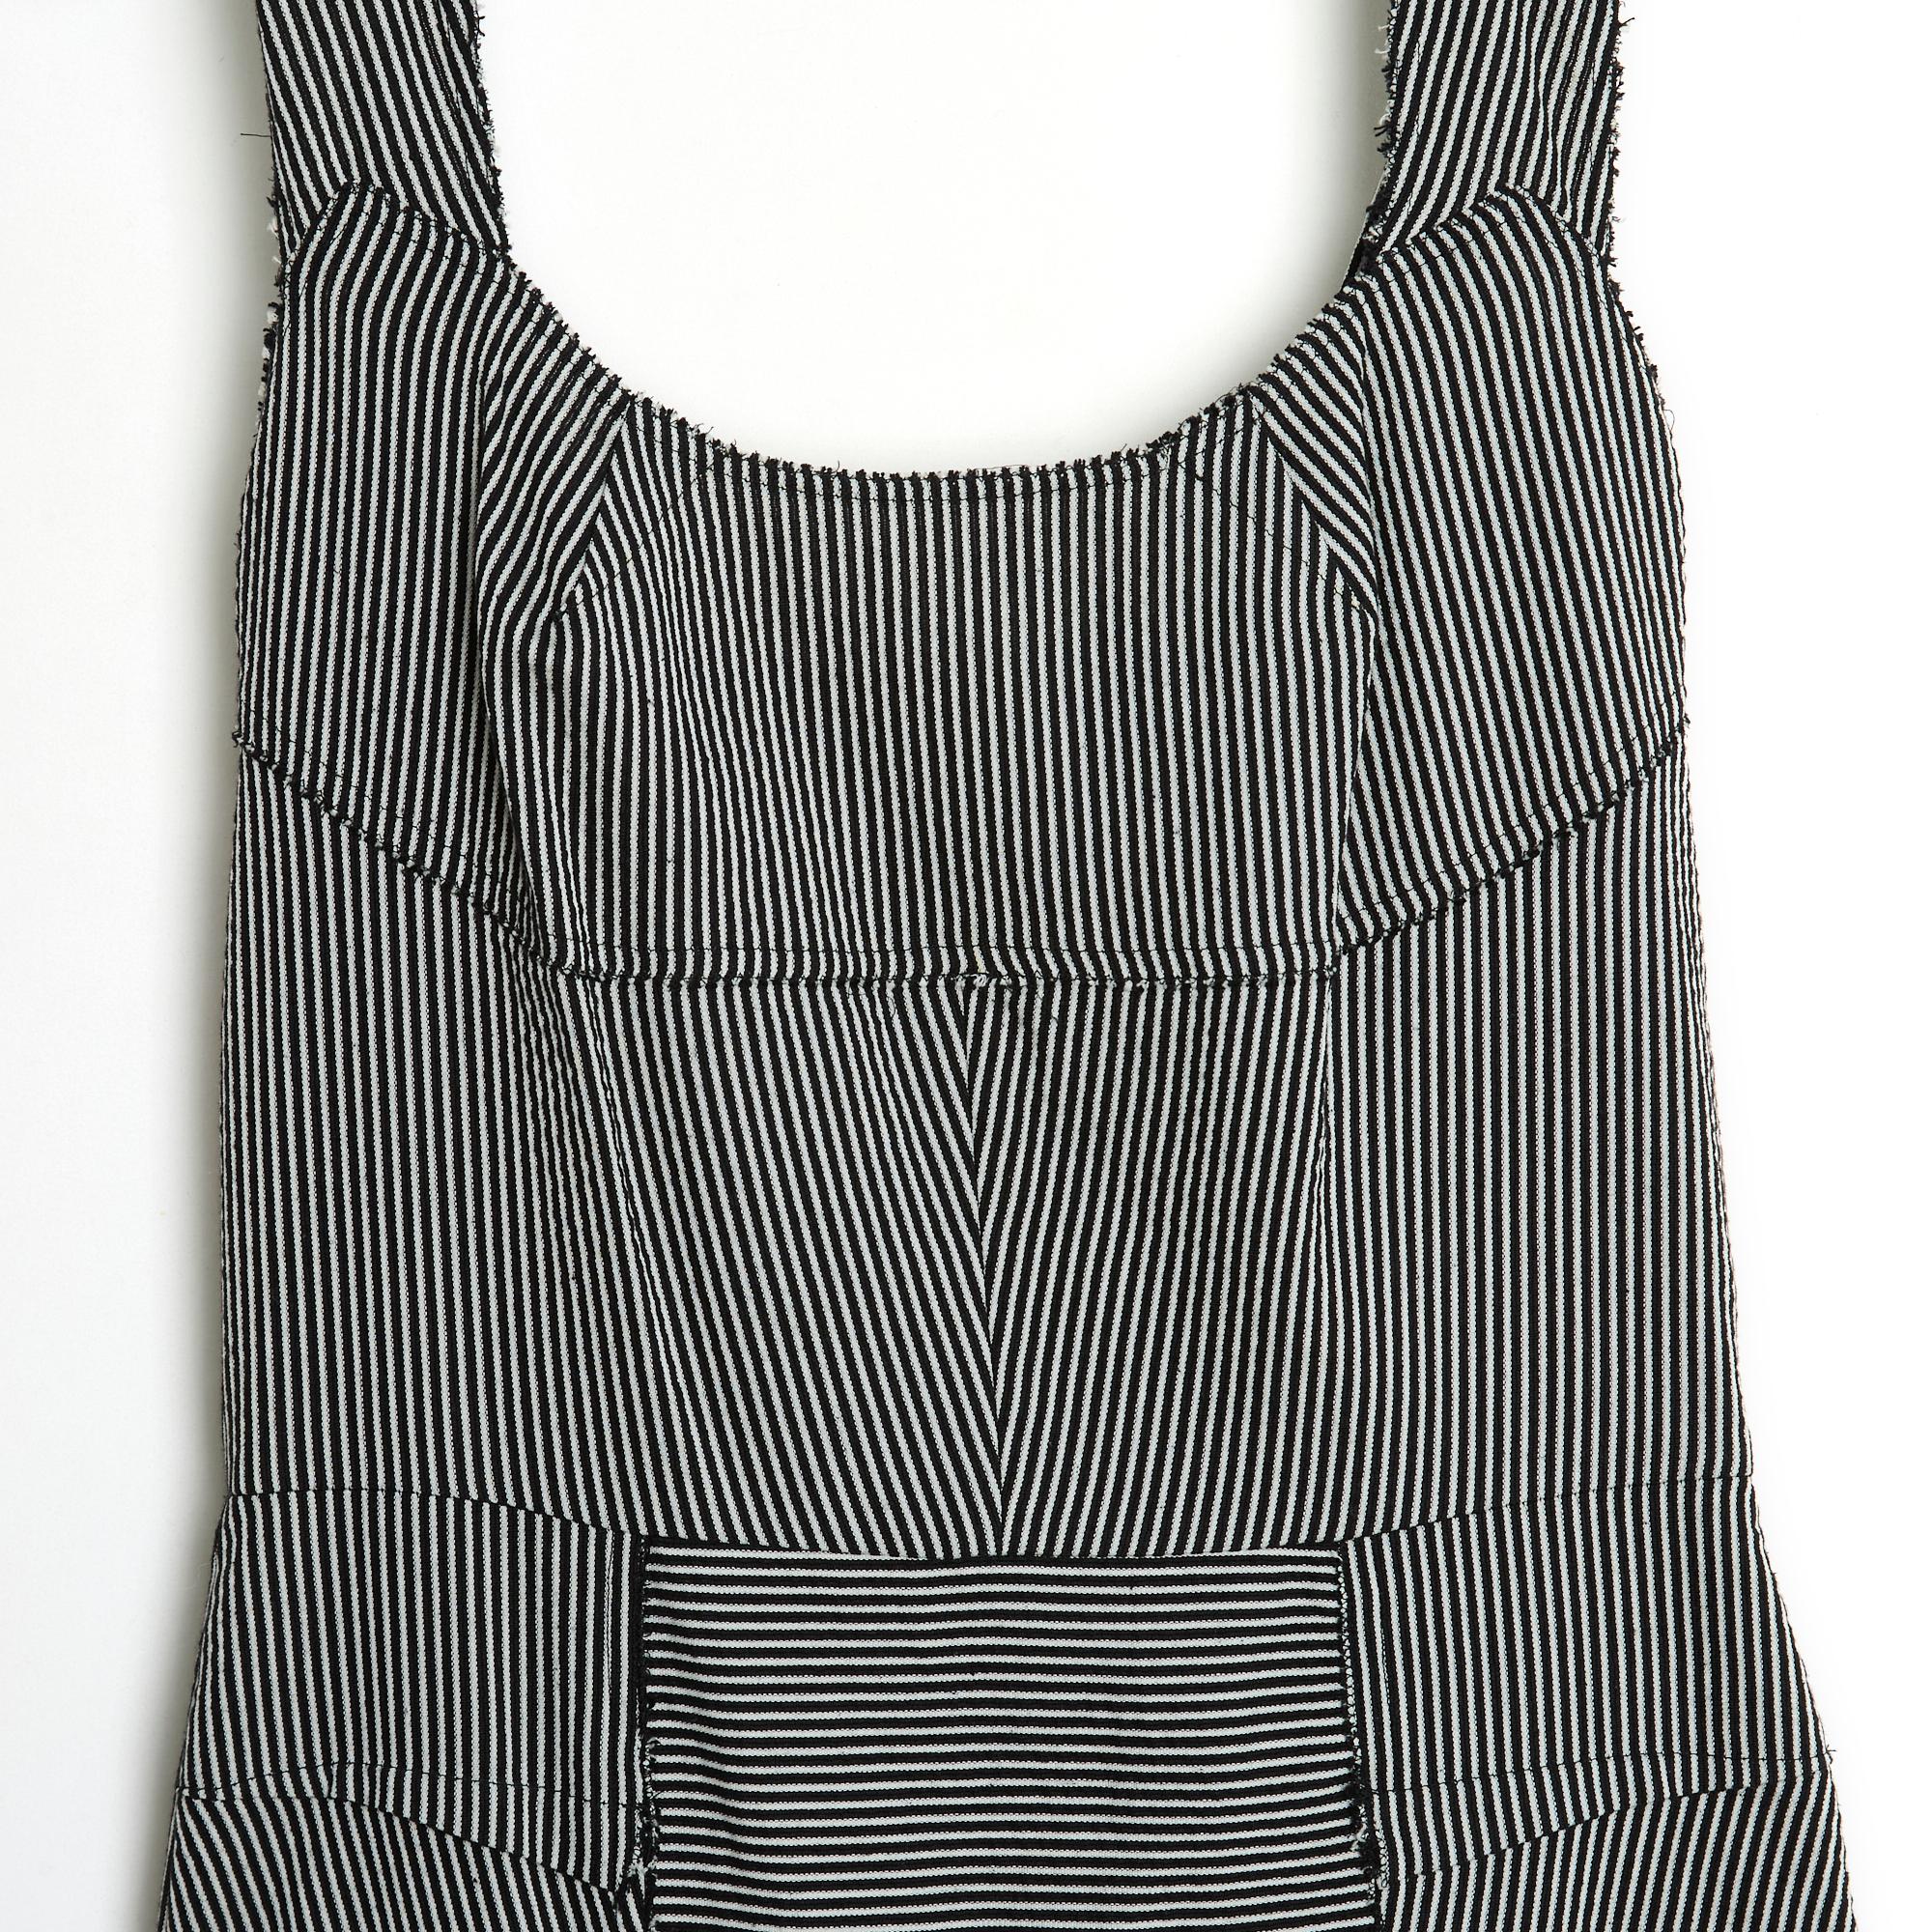 Roland Mouret dress from the Cruise 2006 collection, asymmetrical length, below the knee at the front, in silk and cotton canvas inserts with fine black and light gray stripes, round neckline framed by 2 wide straps and V-neckline in the back, small